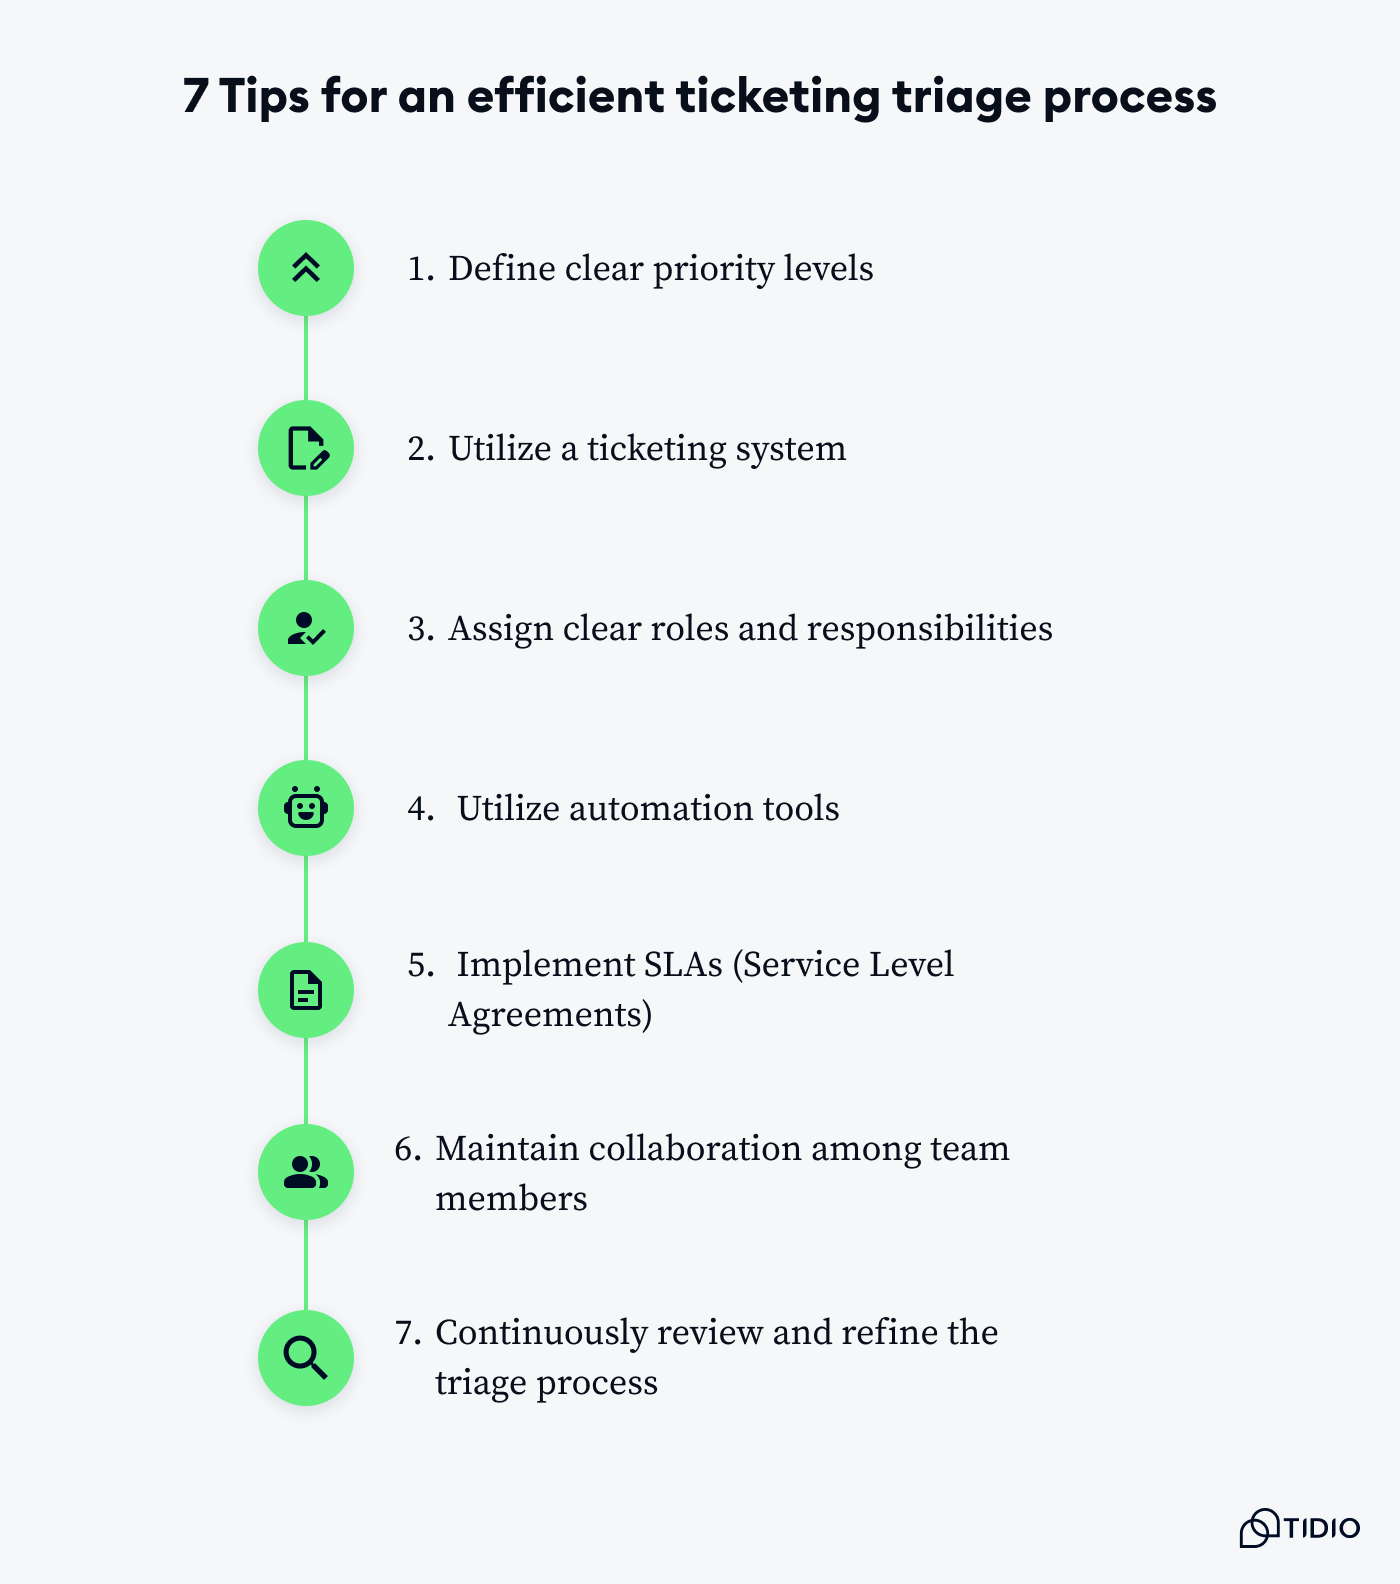 7 Tips for an efficient ticketing triage process